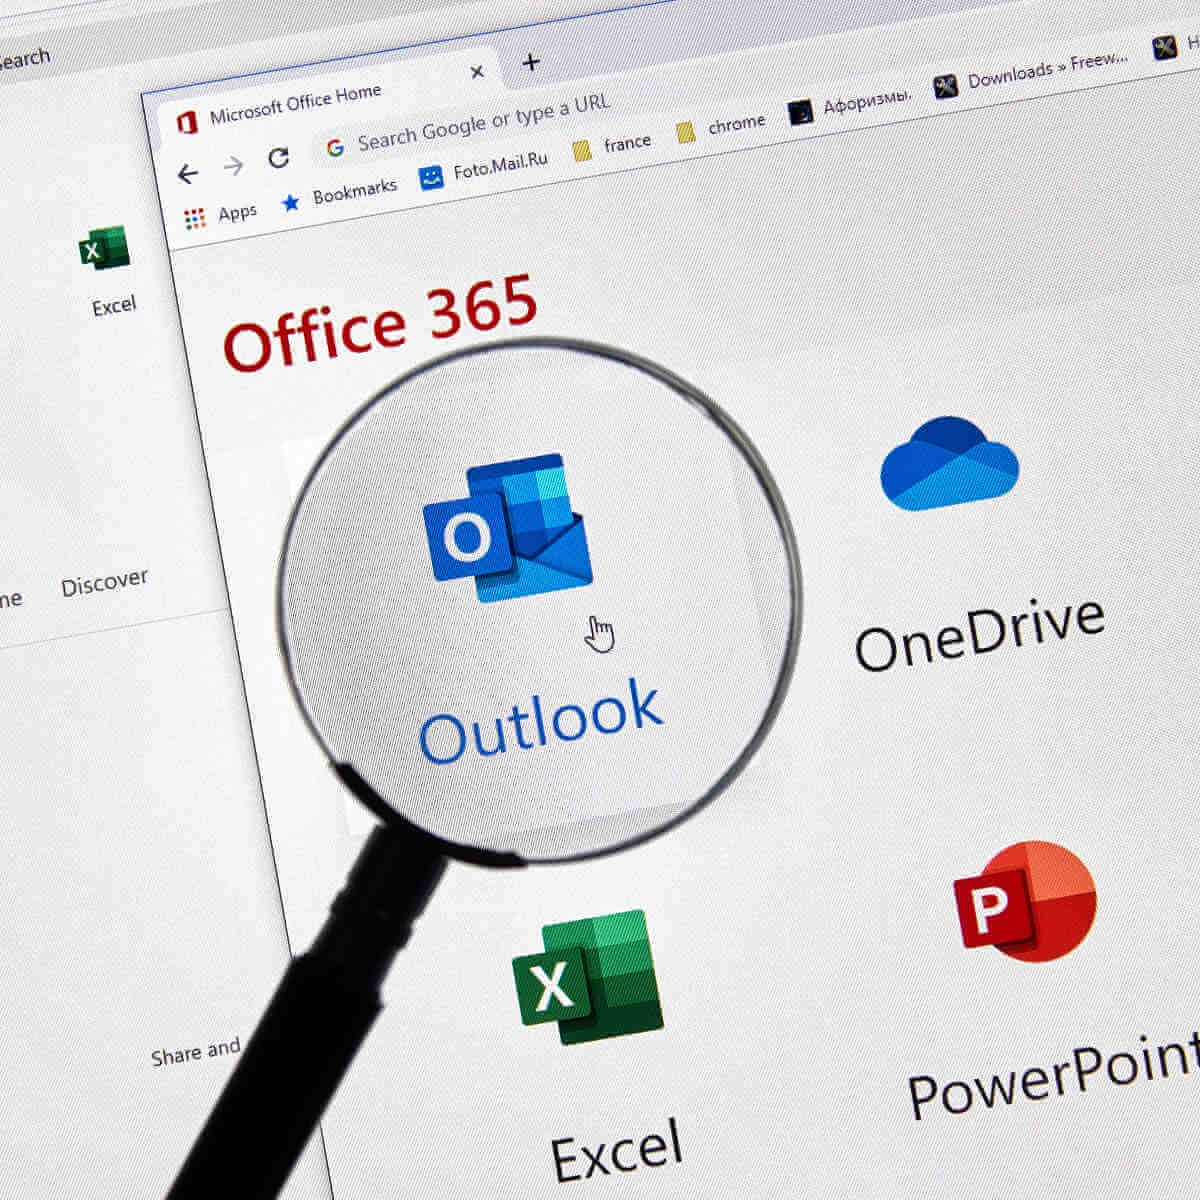 Forward a meeting invite in Outlook with ease